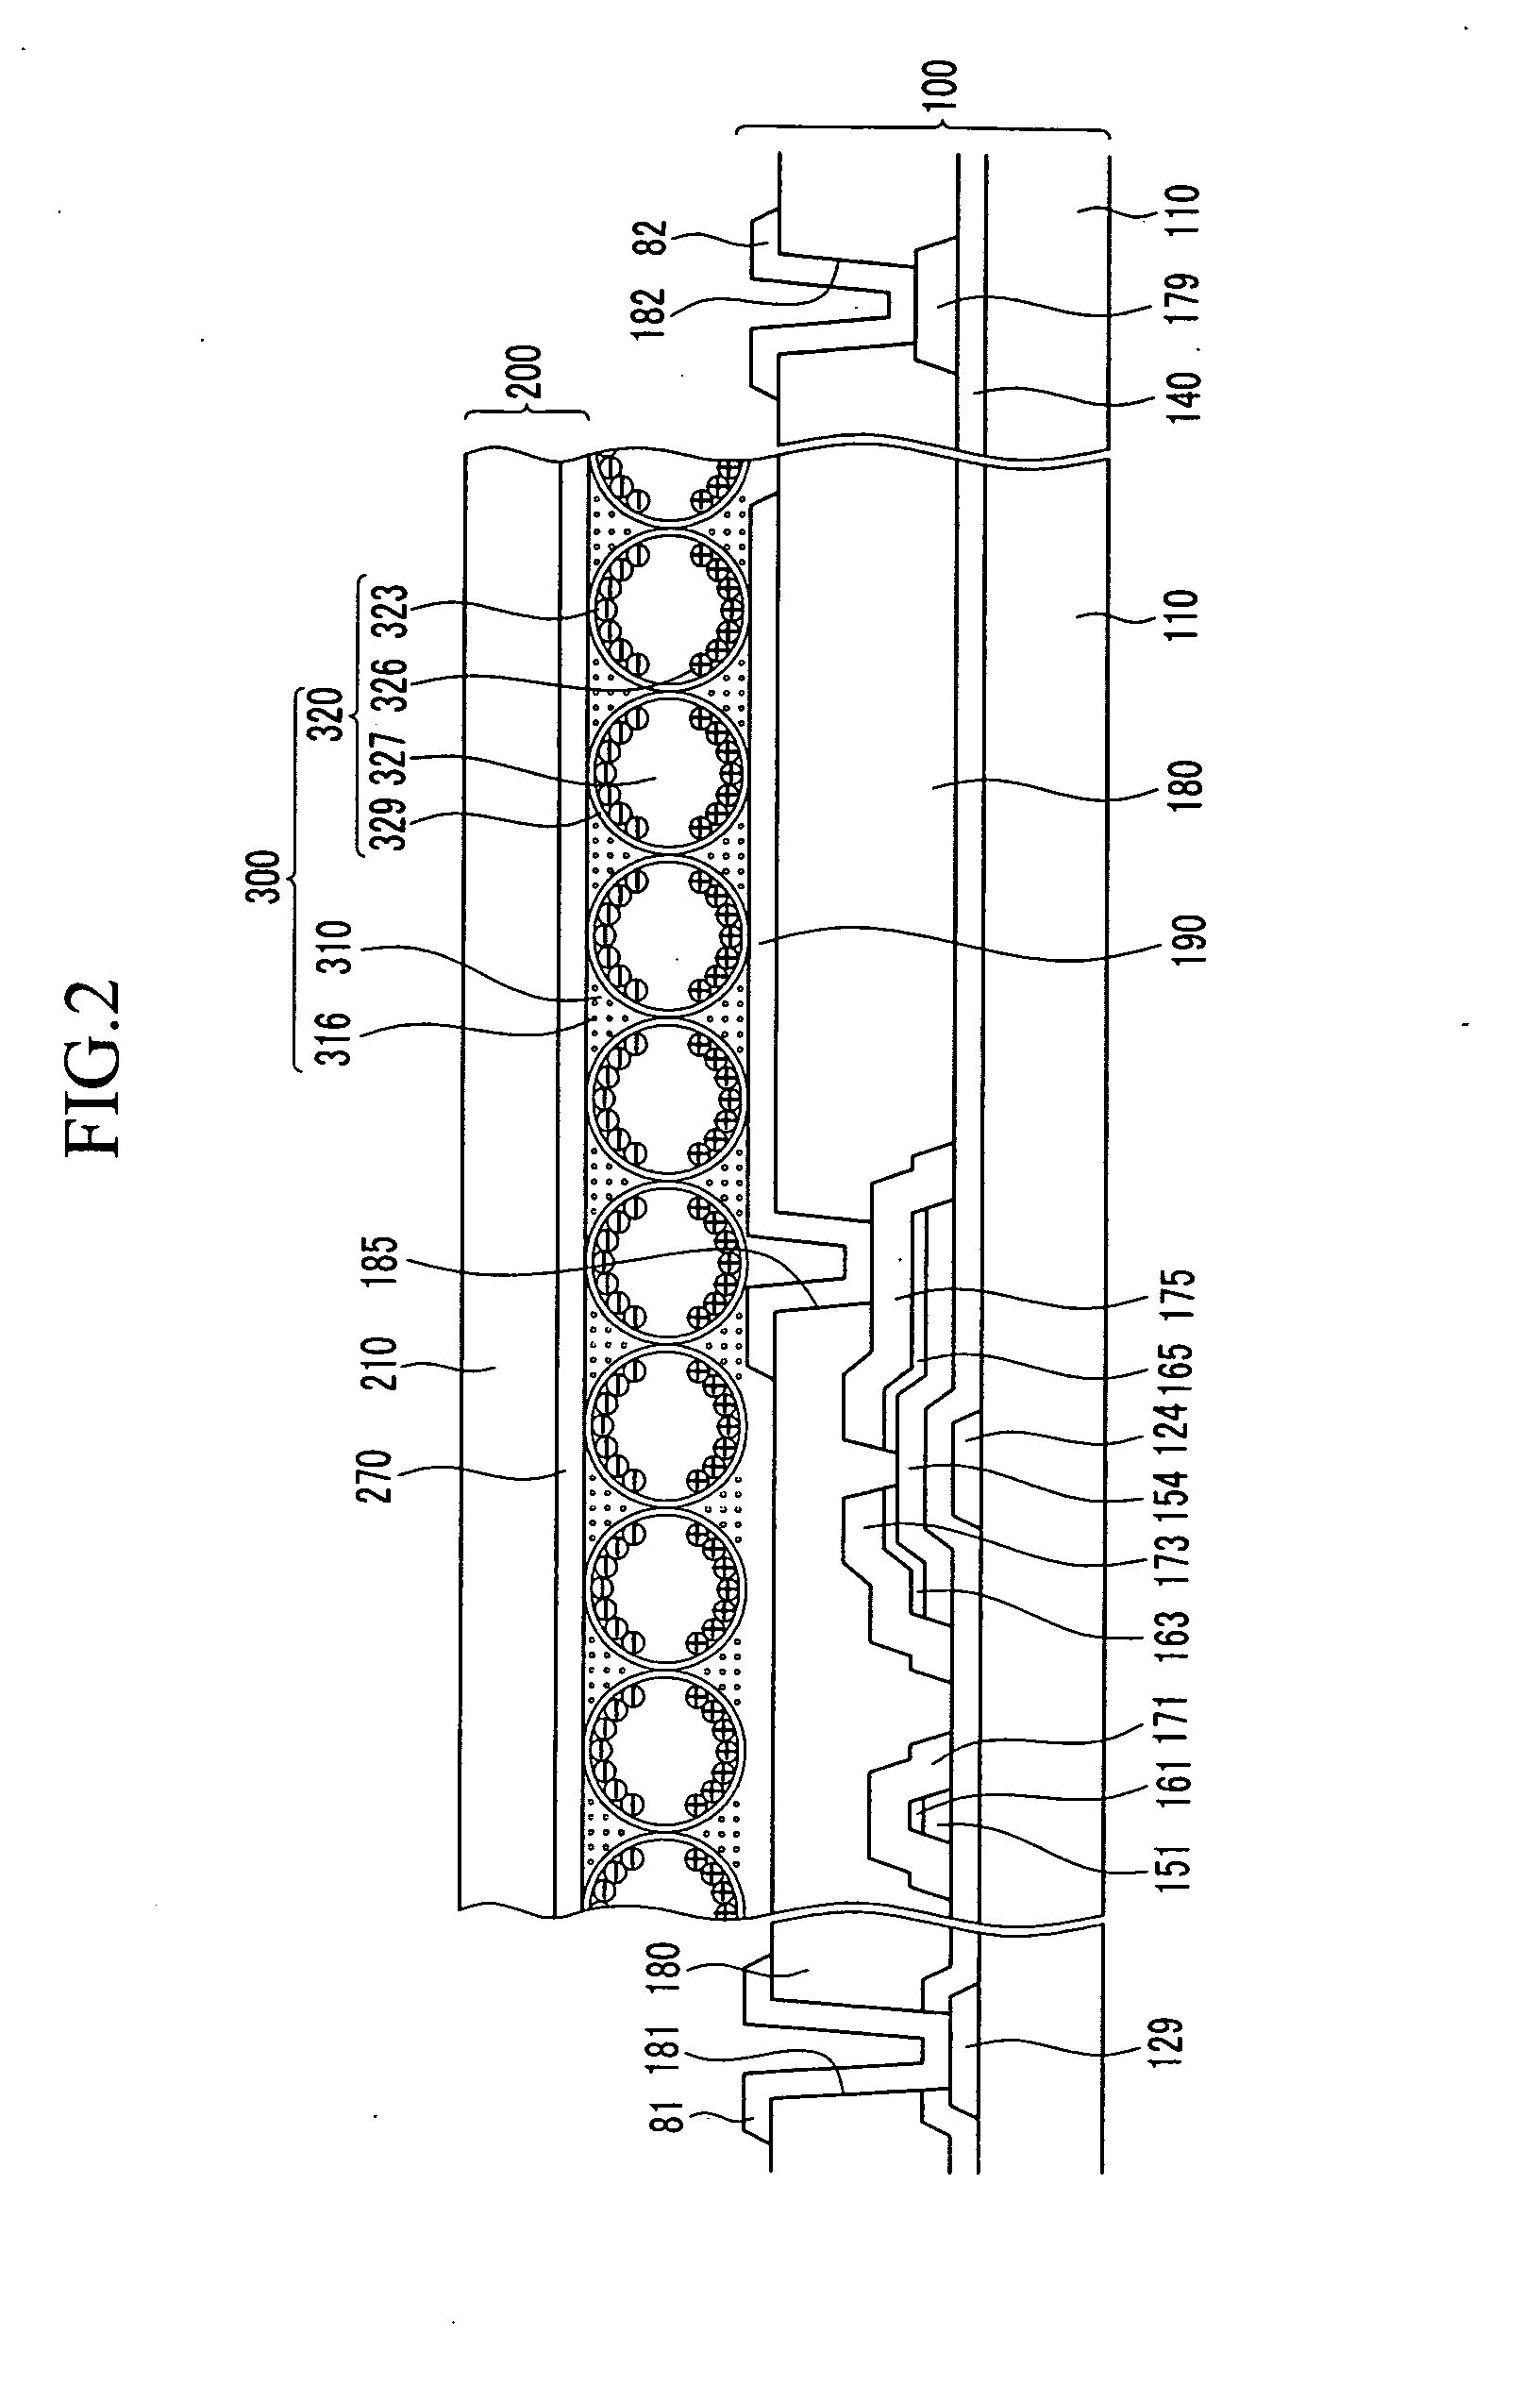 Electyrophoretic display and method for driving the same